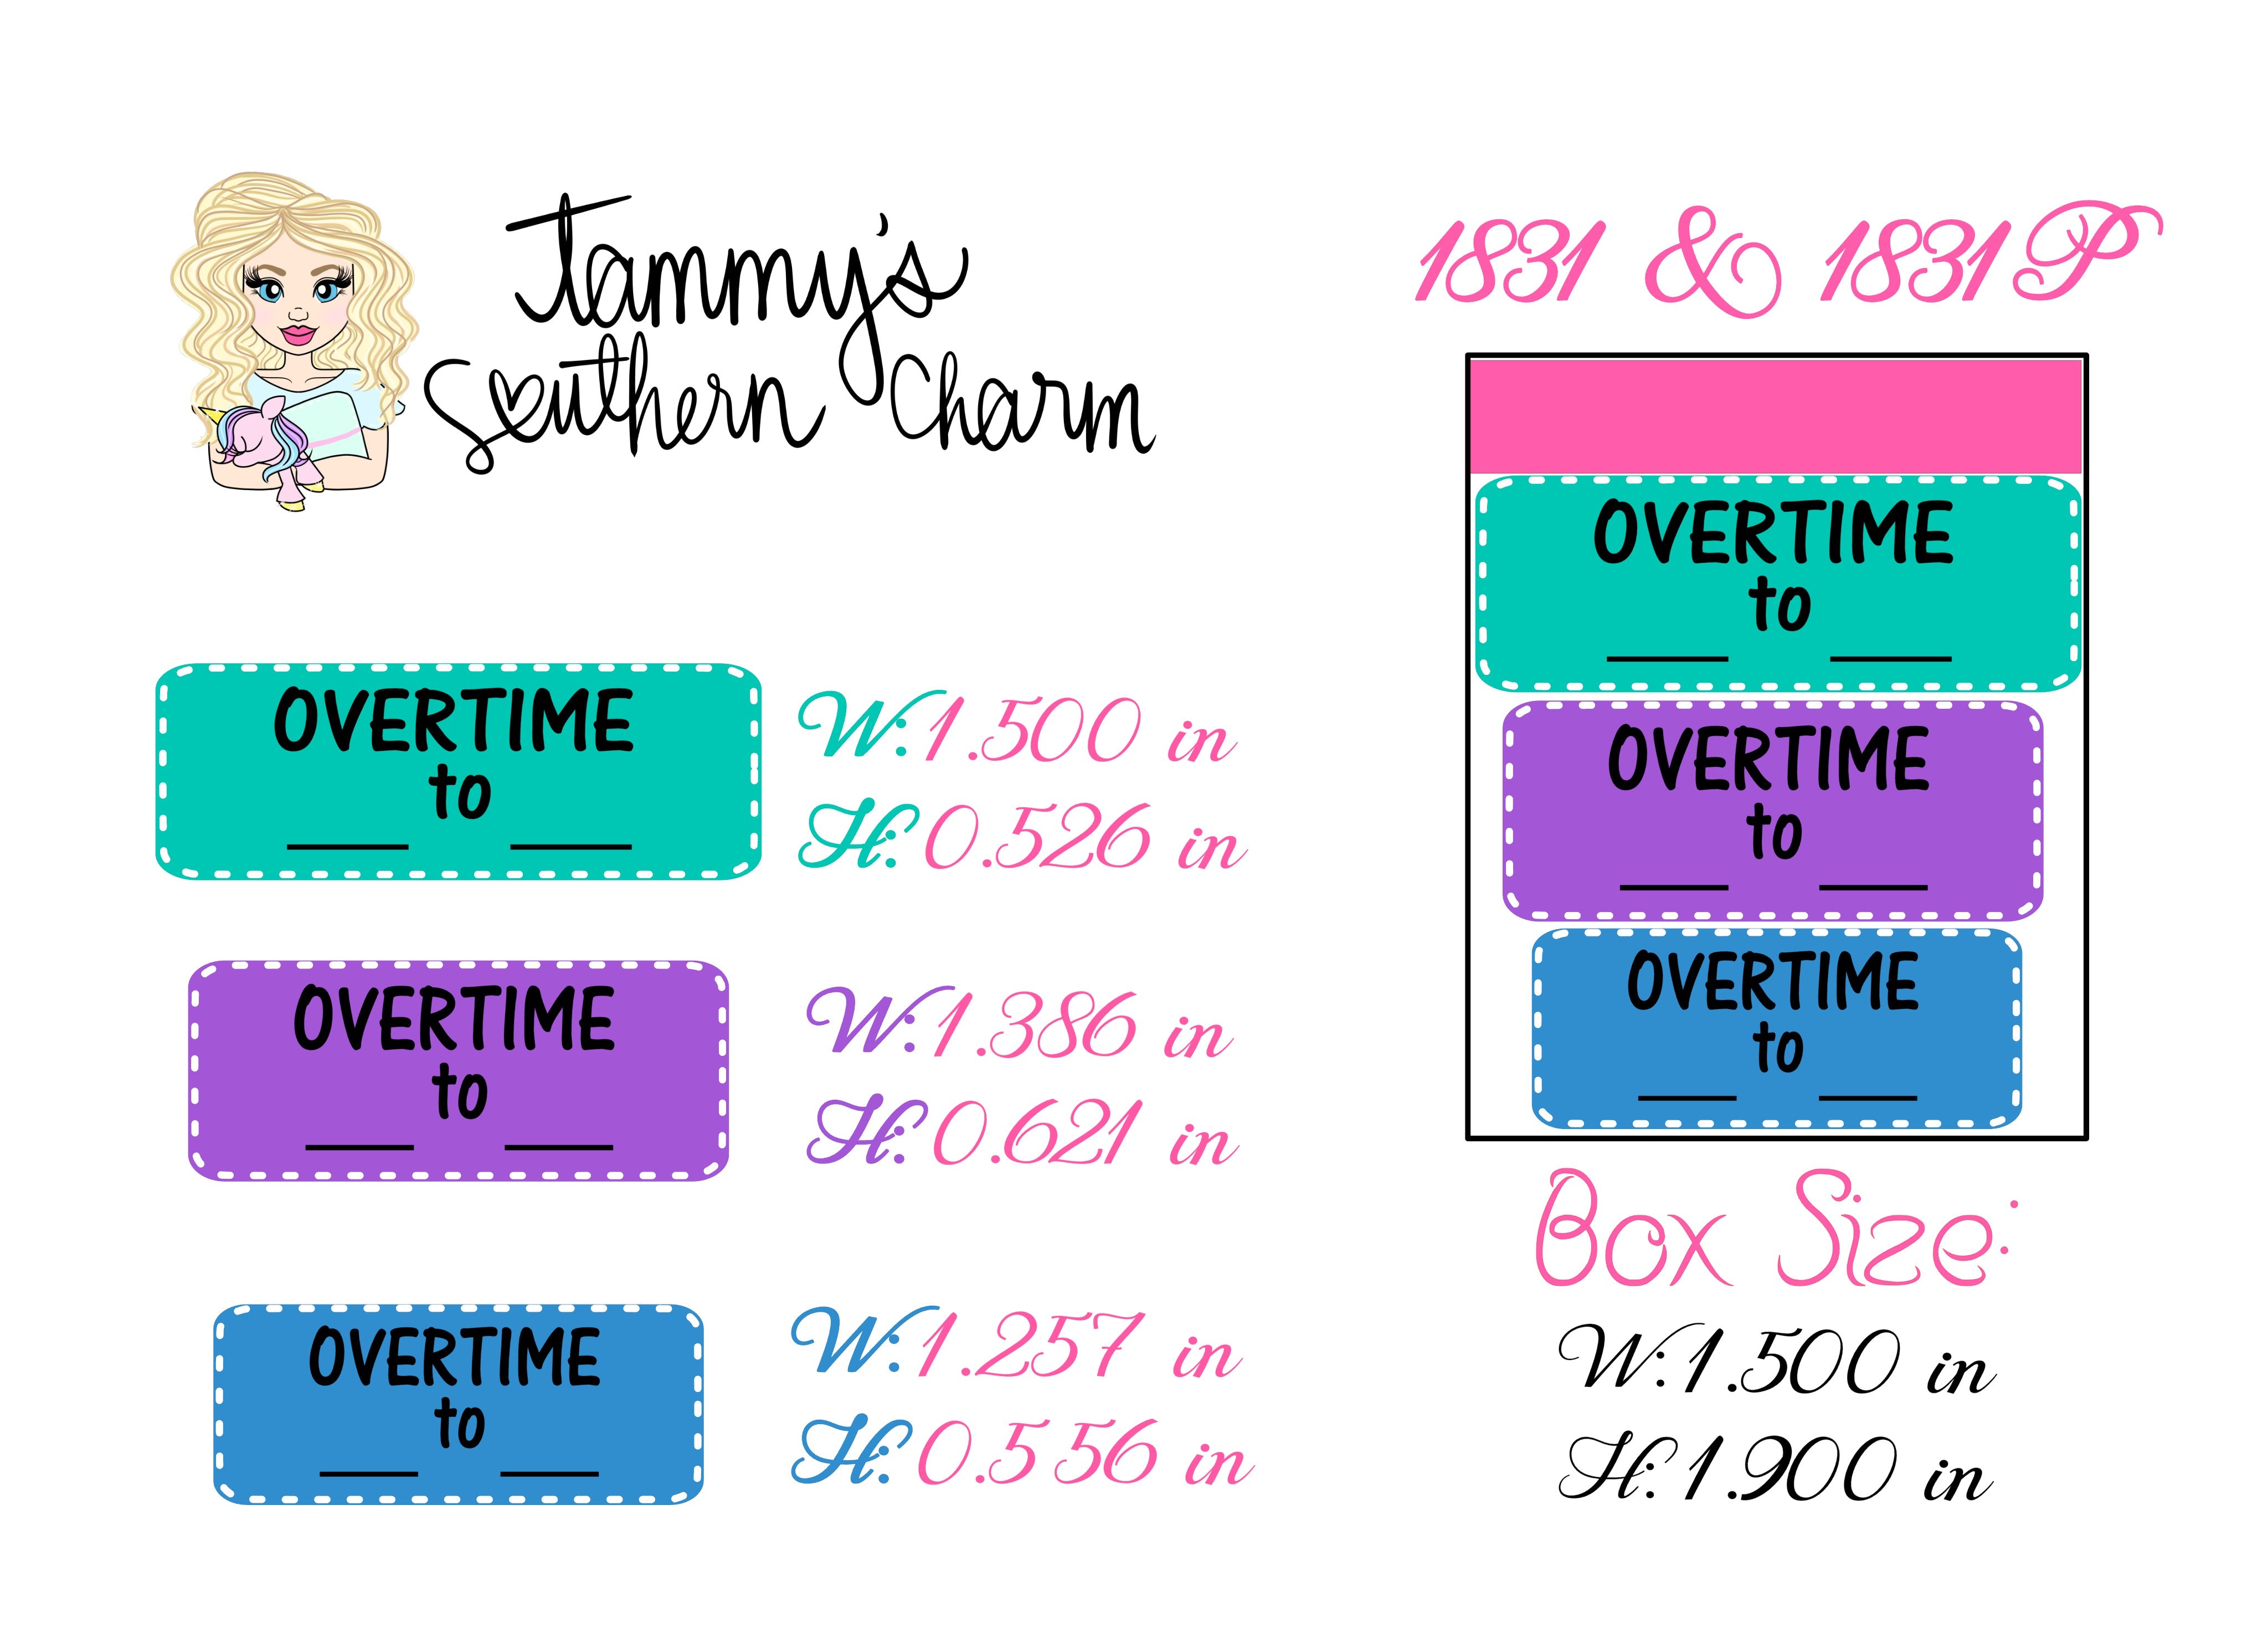 1831 Overtime Stickers